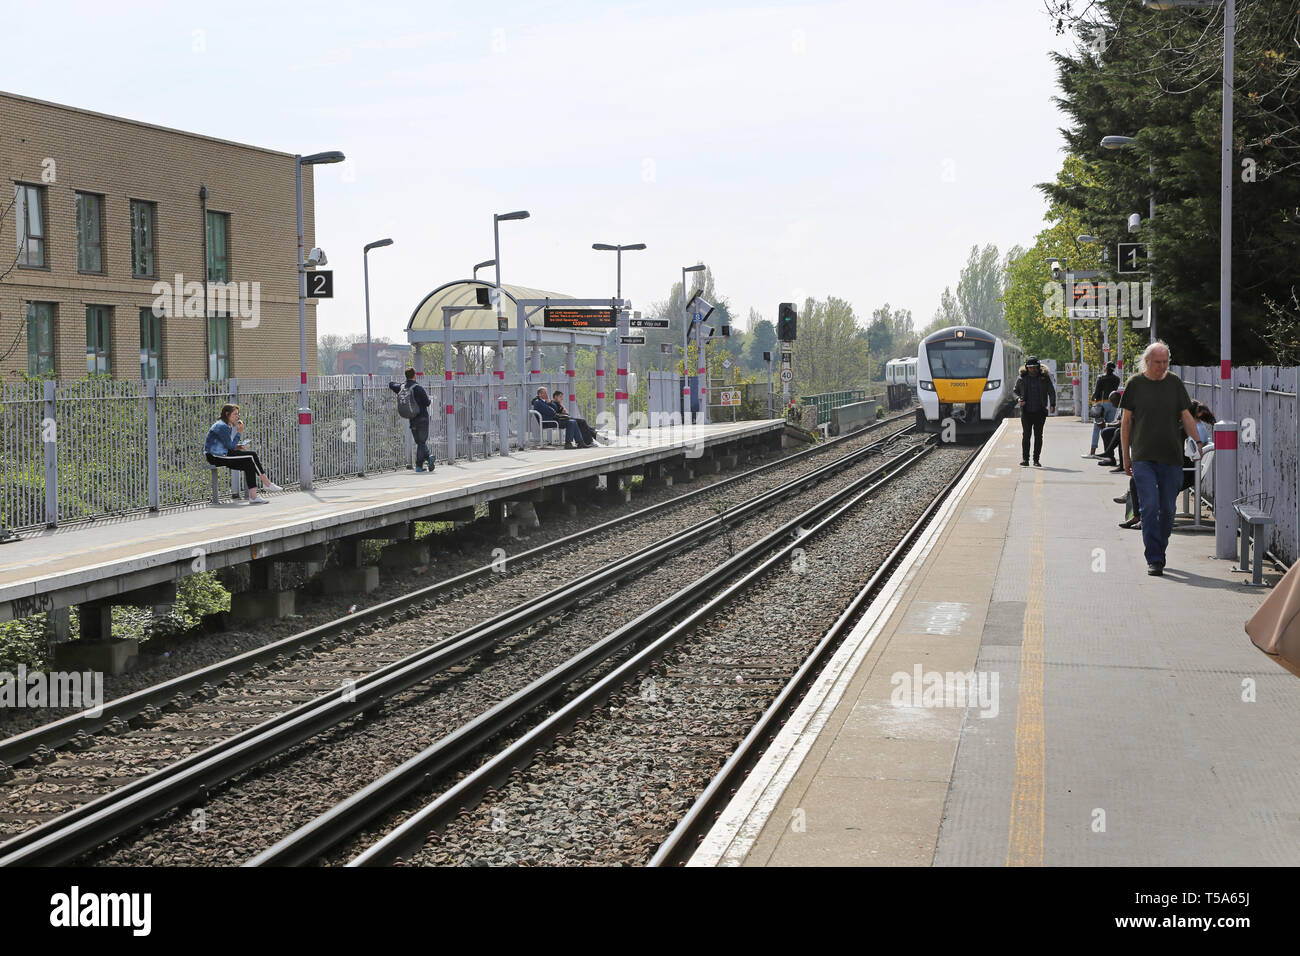 A Thameslink train arrives at Catford Station, South London, UK on a summer afternoon. Stock Photo